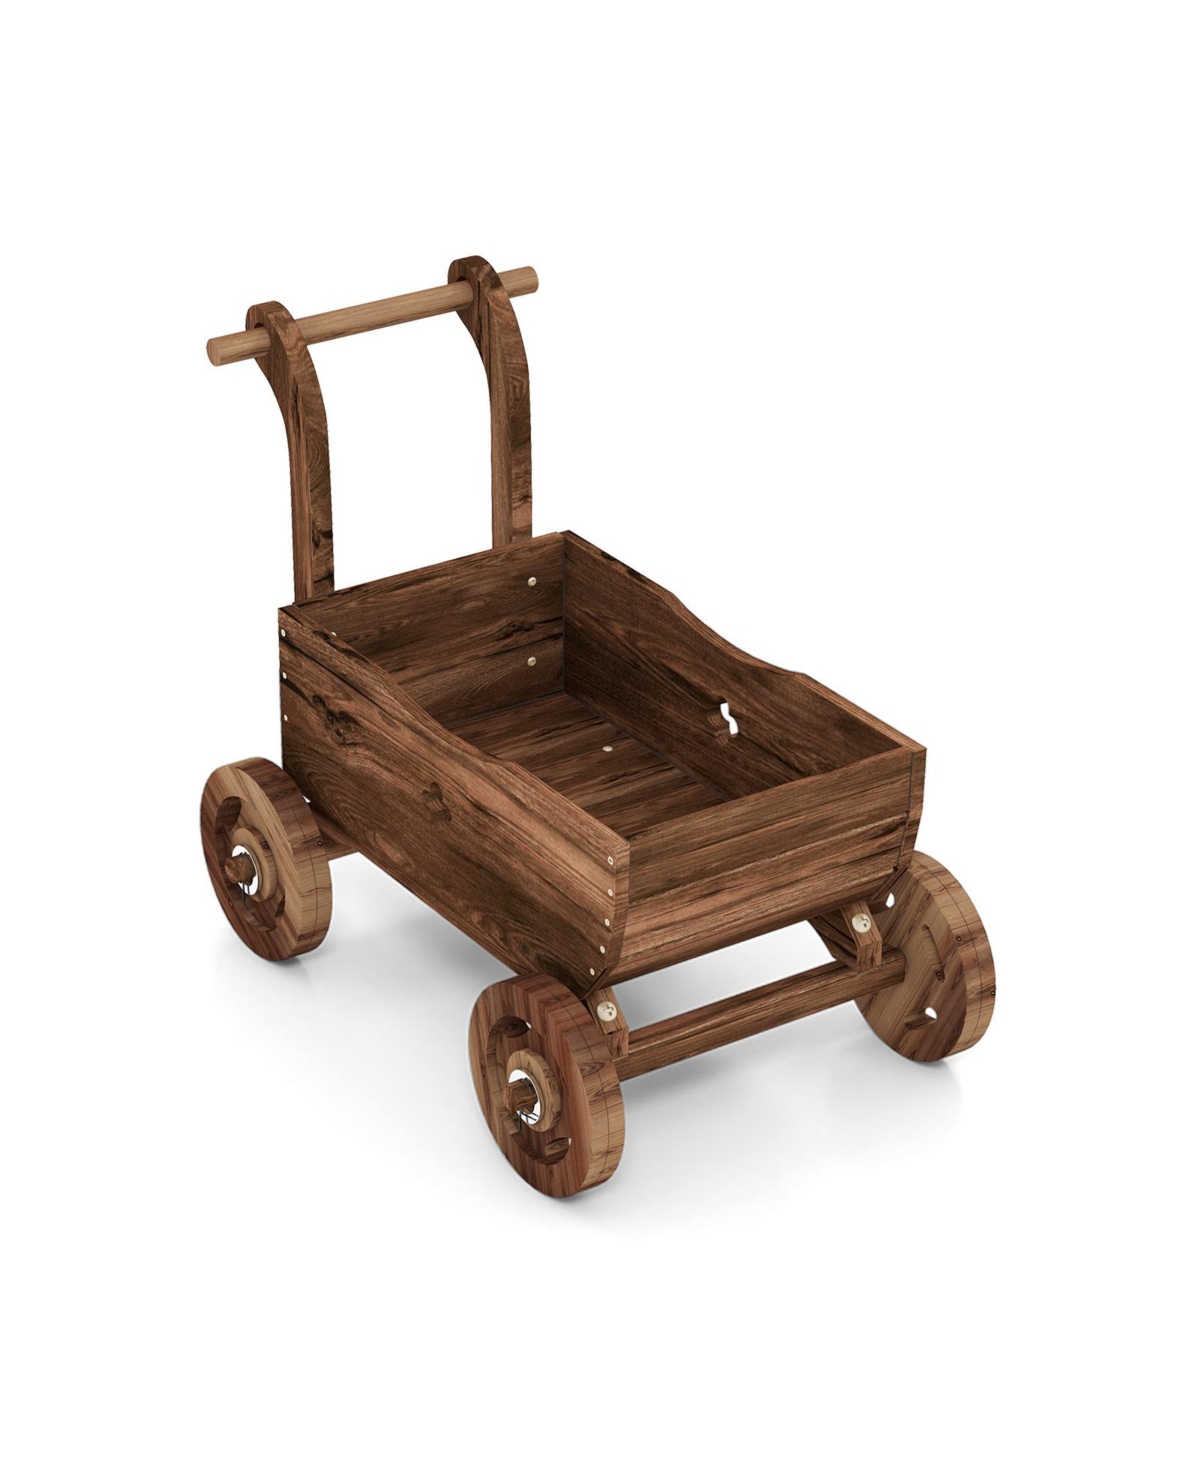 Decorative Wooden Wagon Cart with Handle Wheels and Drainage Hole-Rustic Brown - Rustic Brown